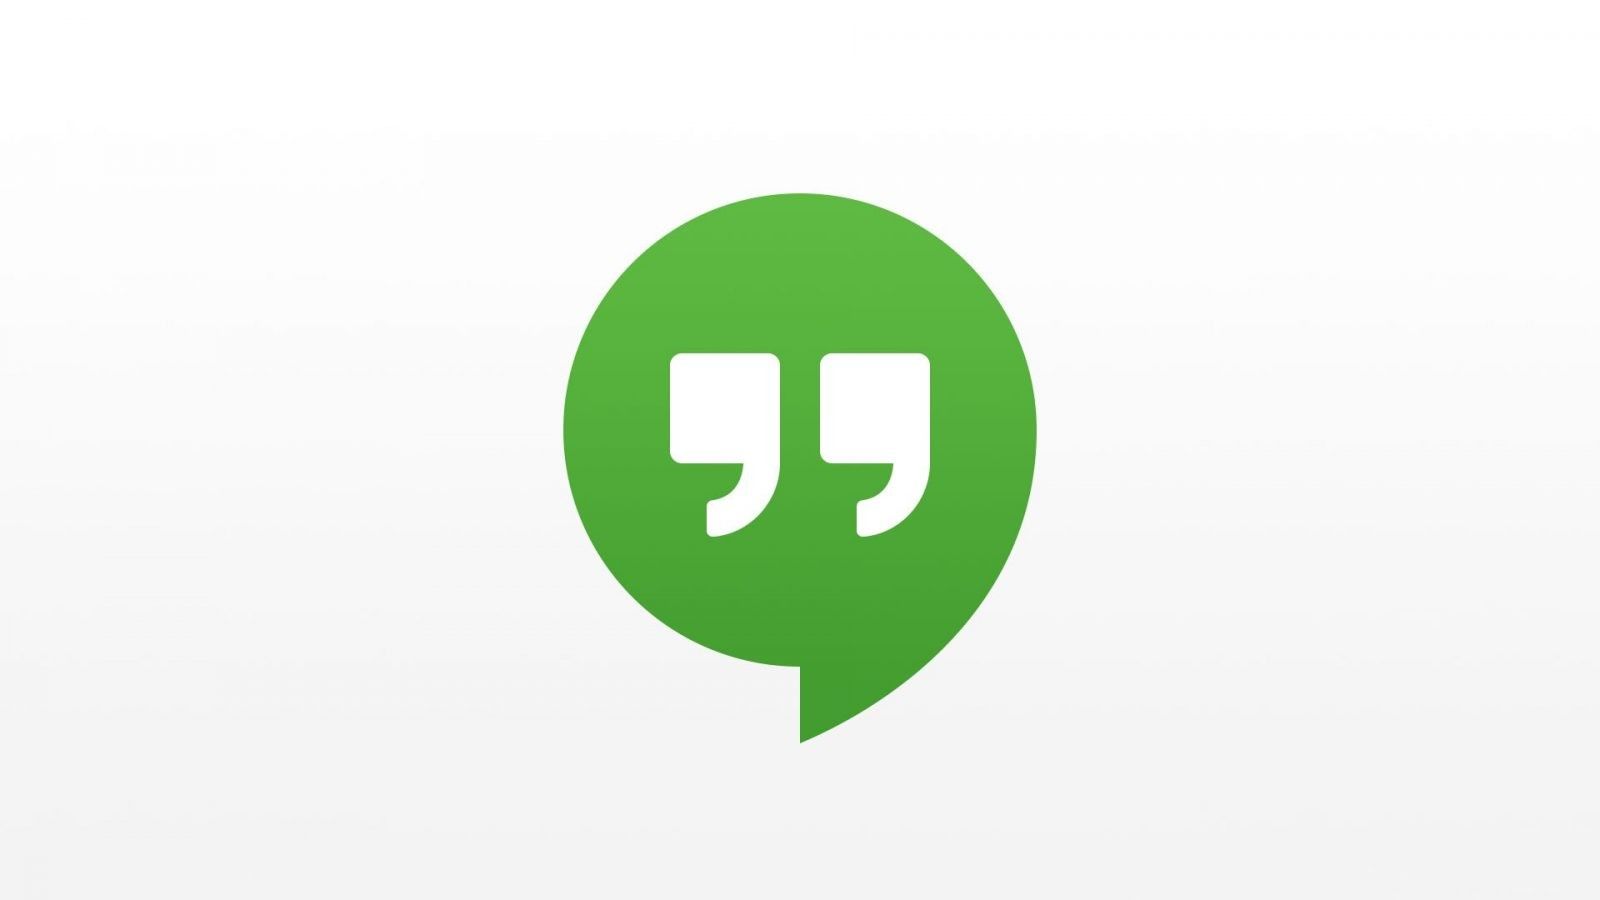 The Hangouts app is disappearing from Google Play and the AppStore